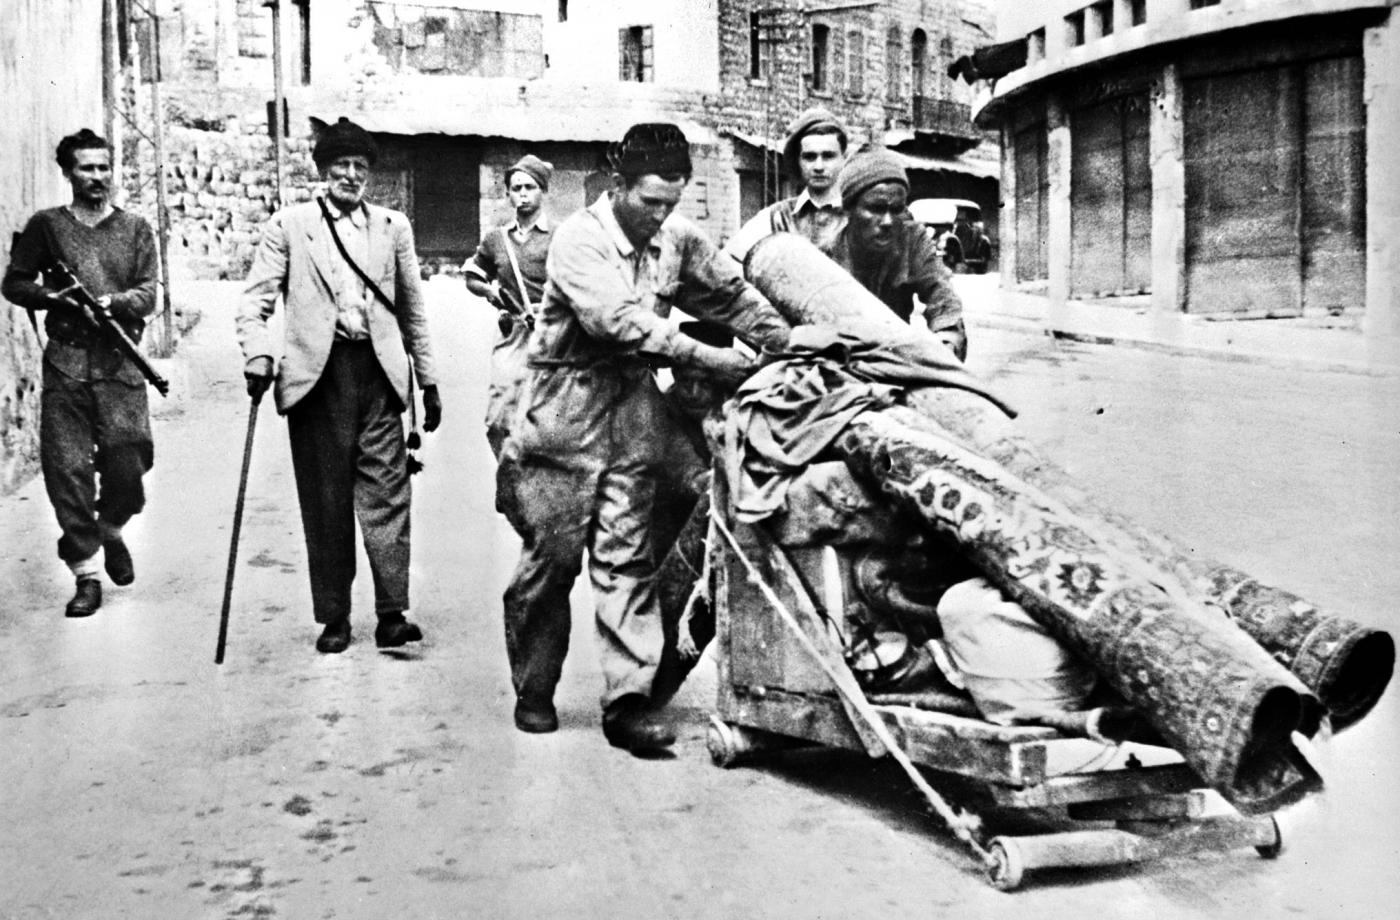 Members of the Zionist gang Haganah expel Palestinians from Haifa in April 1948 (AFP)